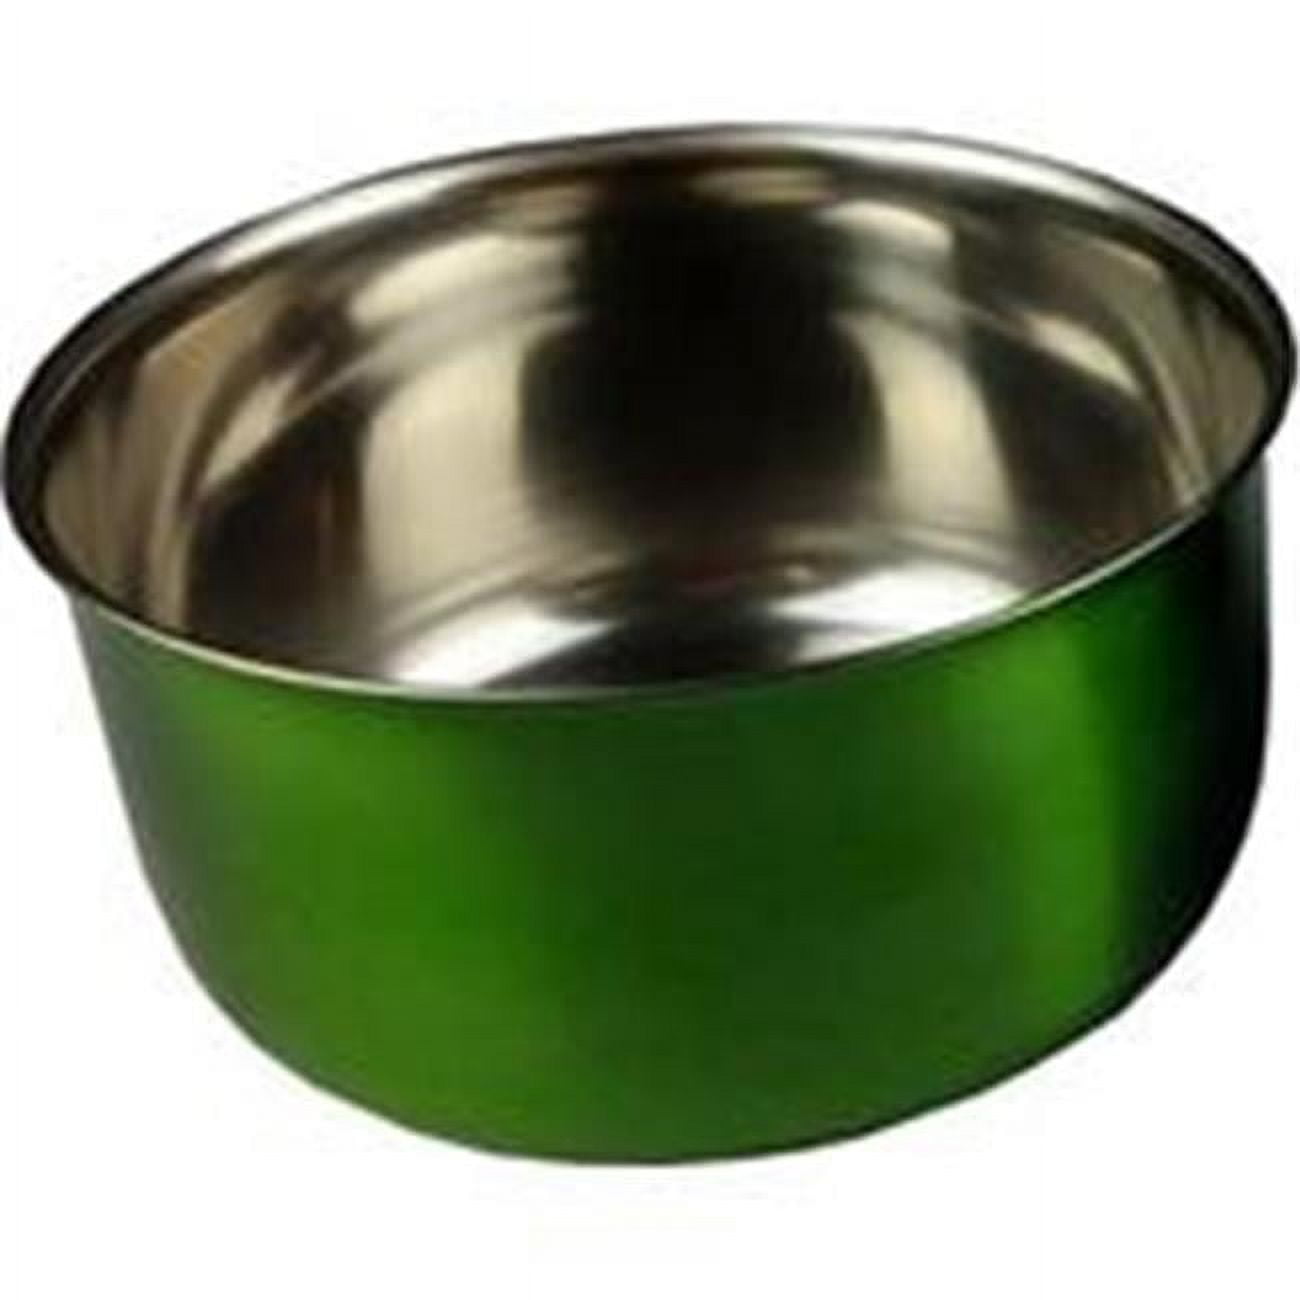 10 Oz Stainless Steel Coop Cup With Bolt Hanger, Green